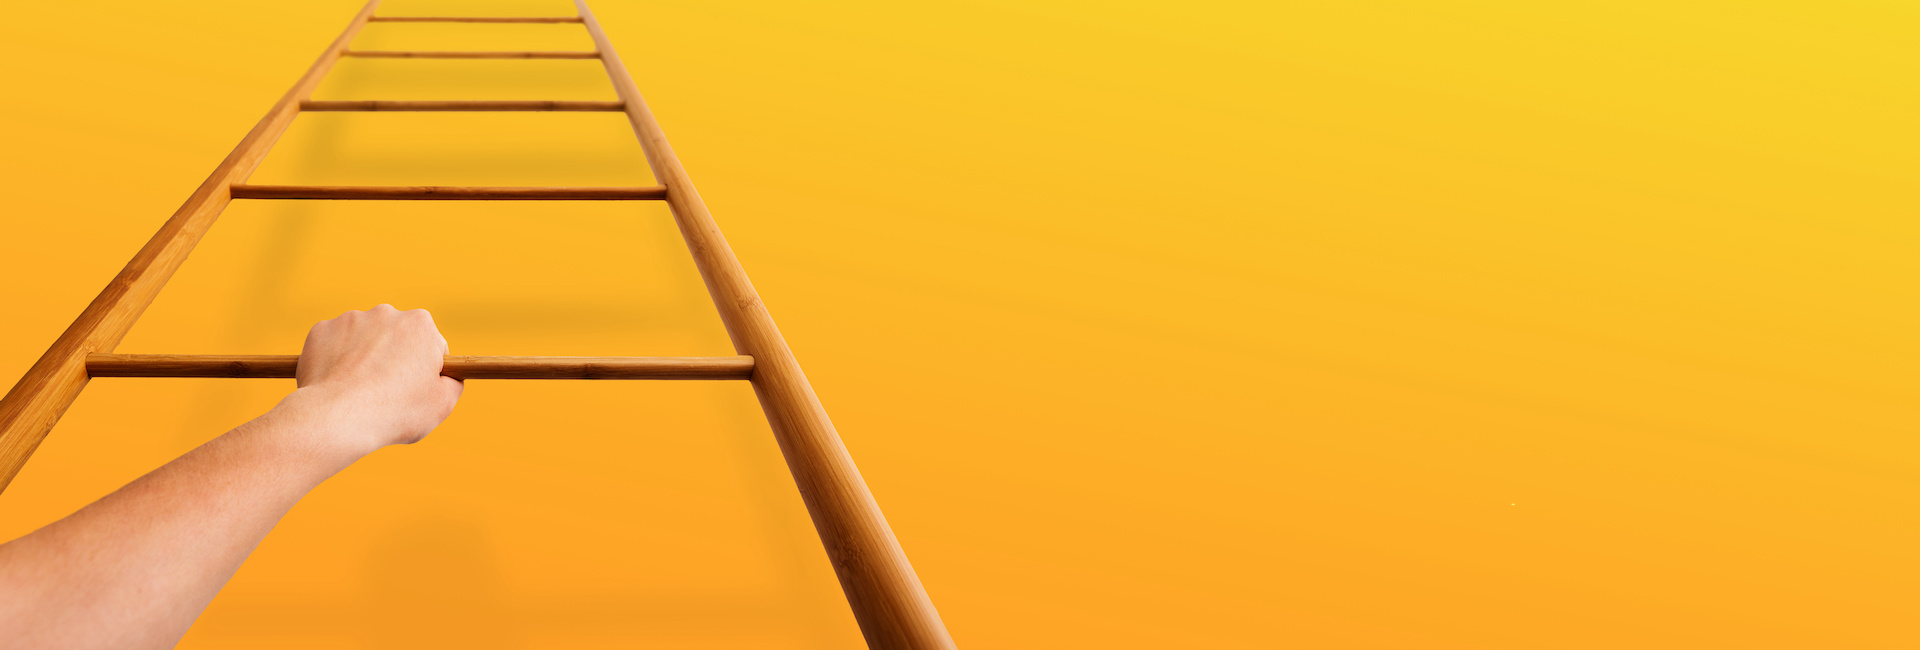 Woman climbing ladder with yellow background 